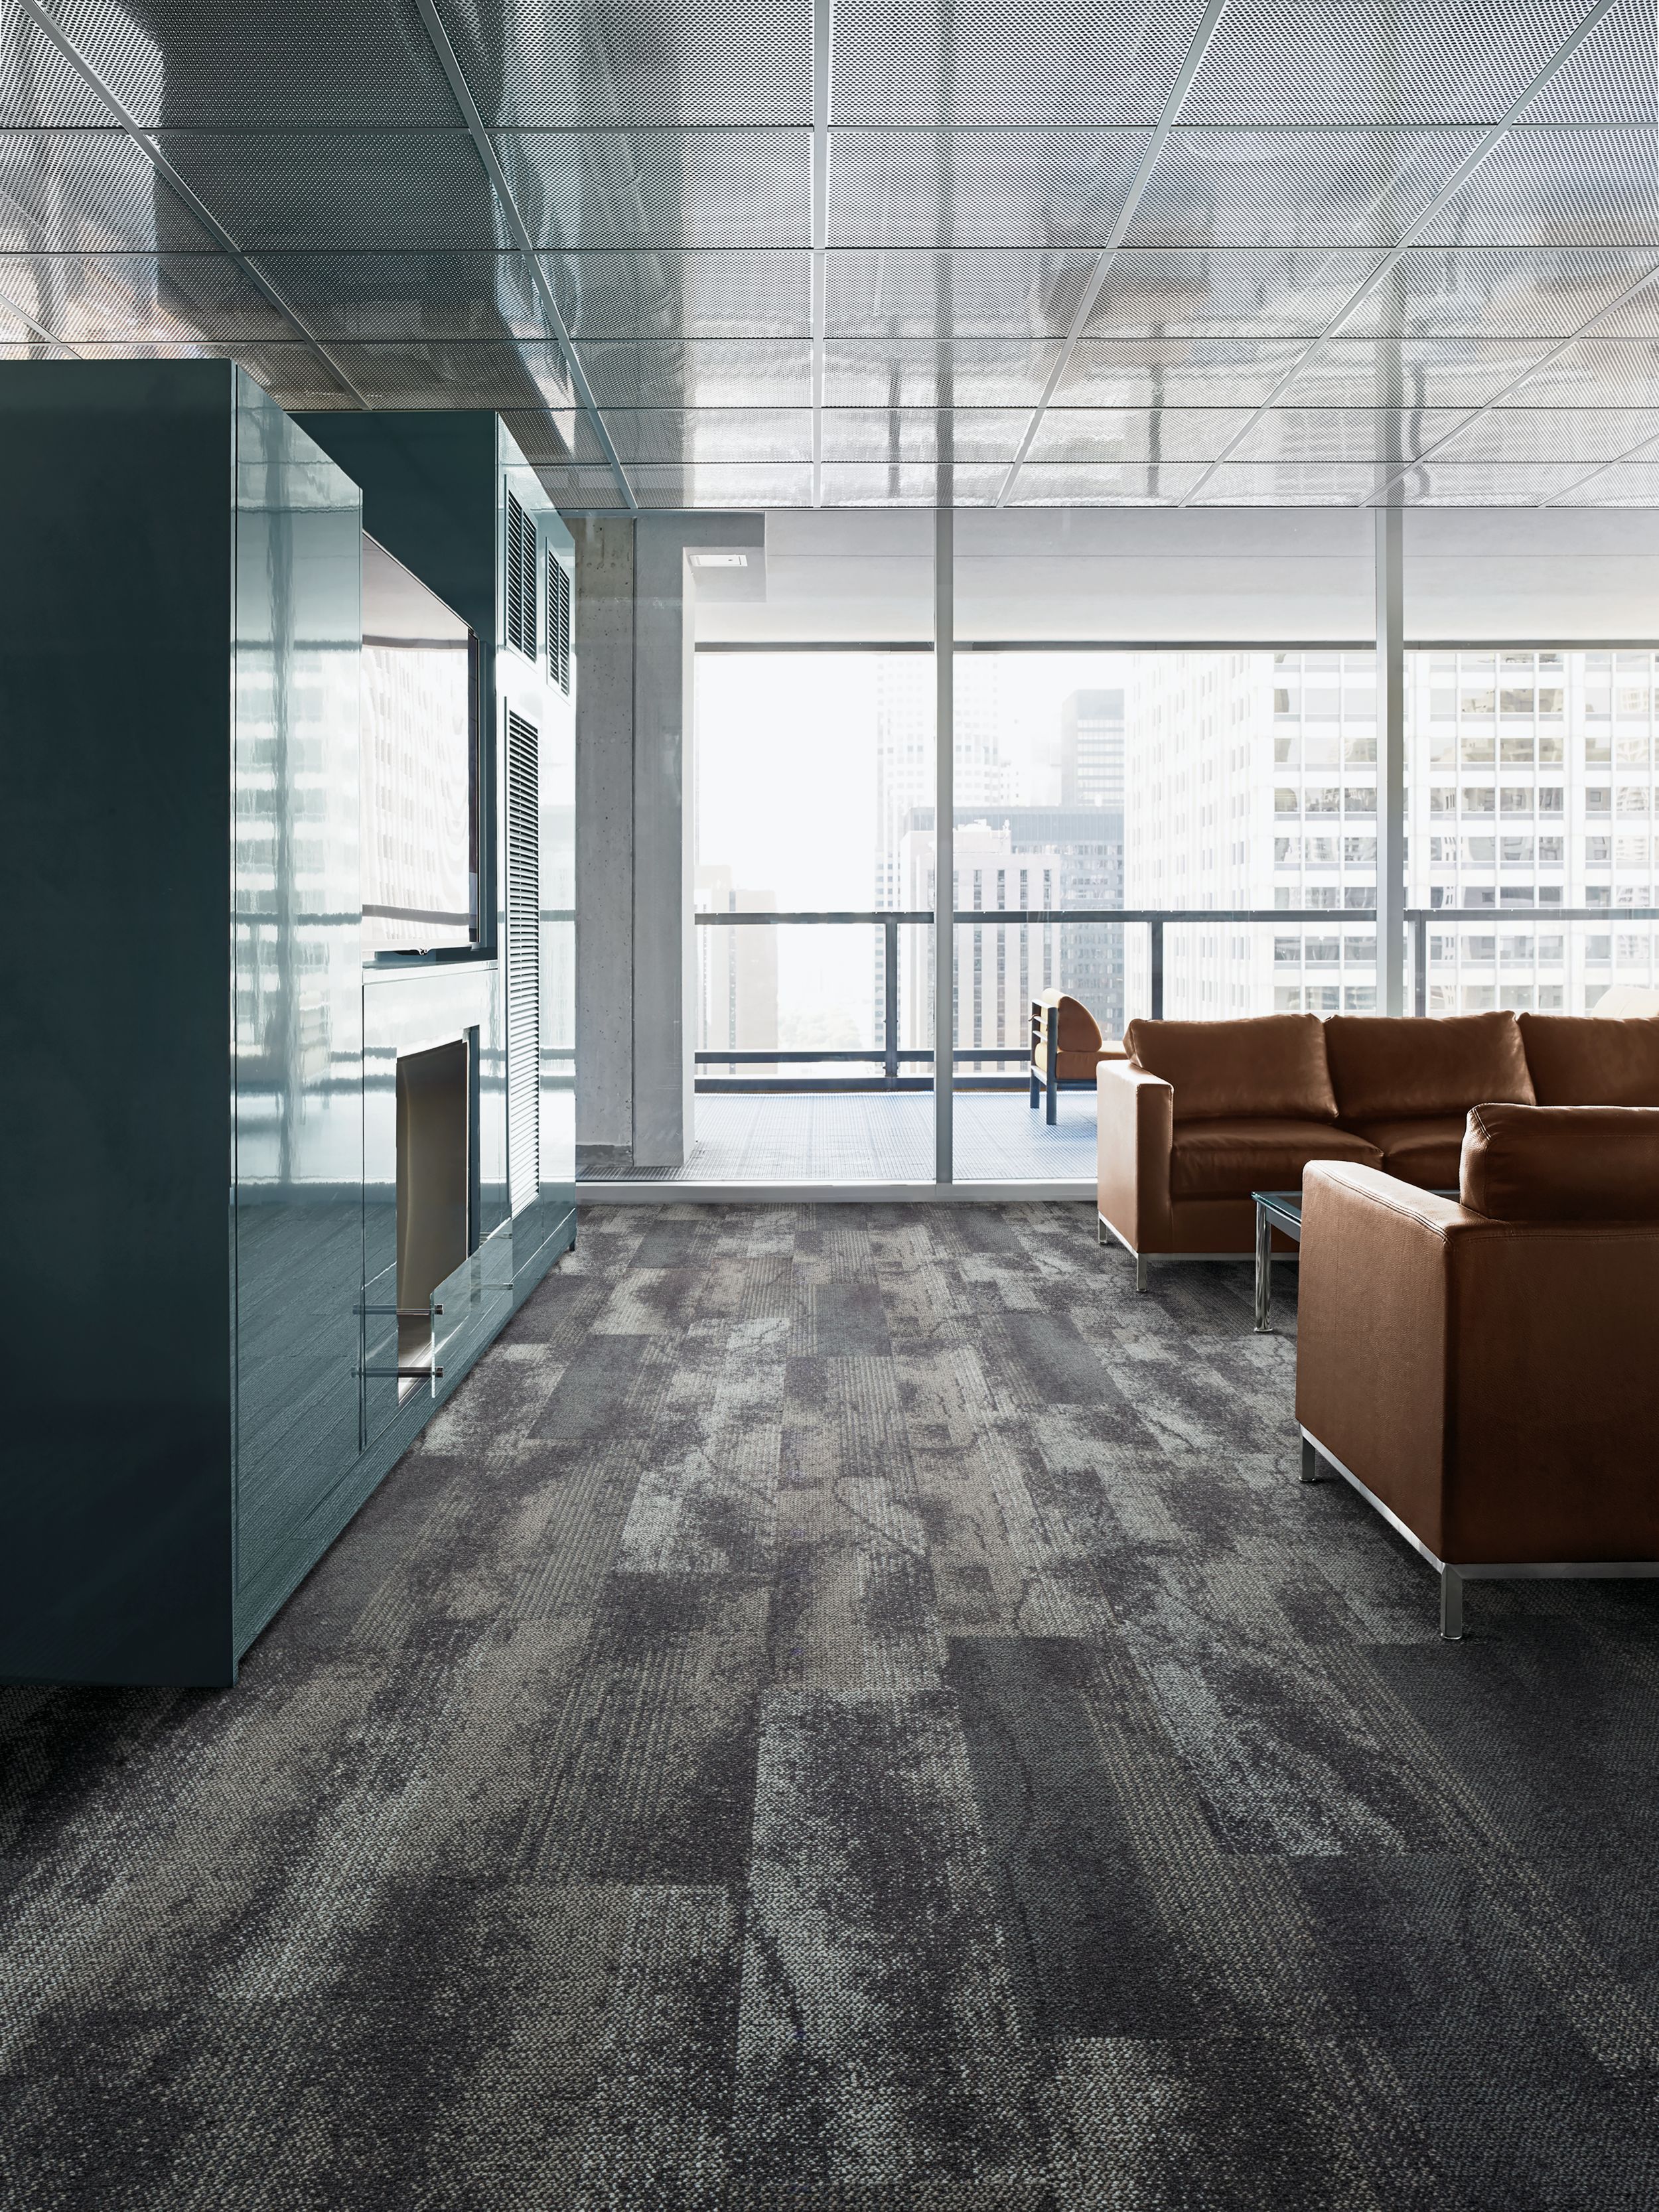 Interface Neighborhood Smooth plank carpet tile in residential public space with brown couches and glass walls image number 10